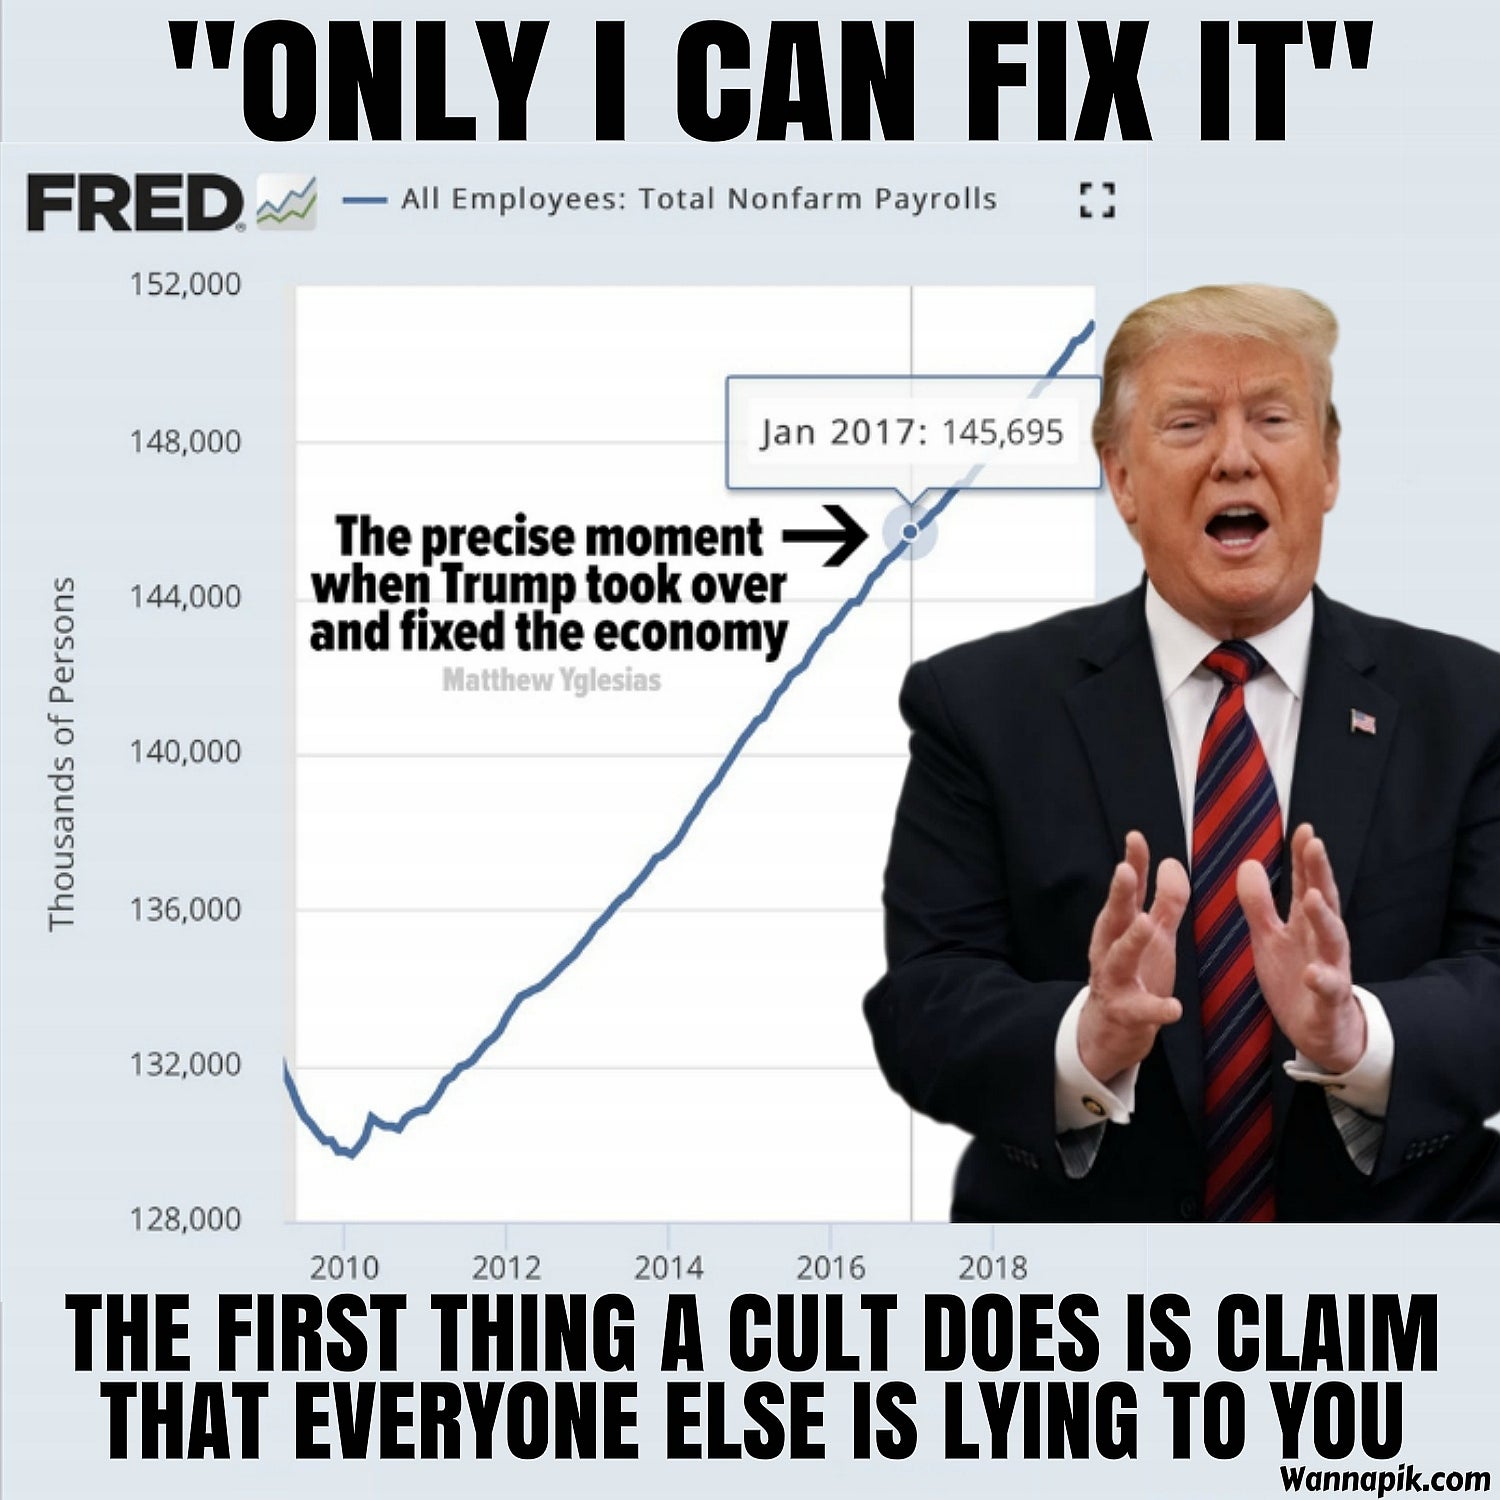 public speaking - "Only I Can Fix It" Fredx All Employe All Employees Total Nonfarm Payrolls 152,000 148, 145,695 144,000 The precise moment > when Trump took over and fixed the economy Matthew Yglesias Thousands of Persons 140,000 136,000 132,000 128,000